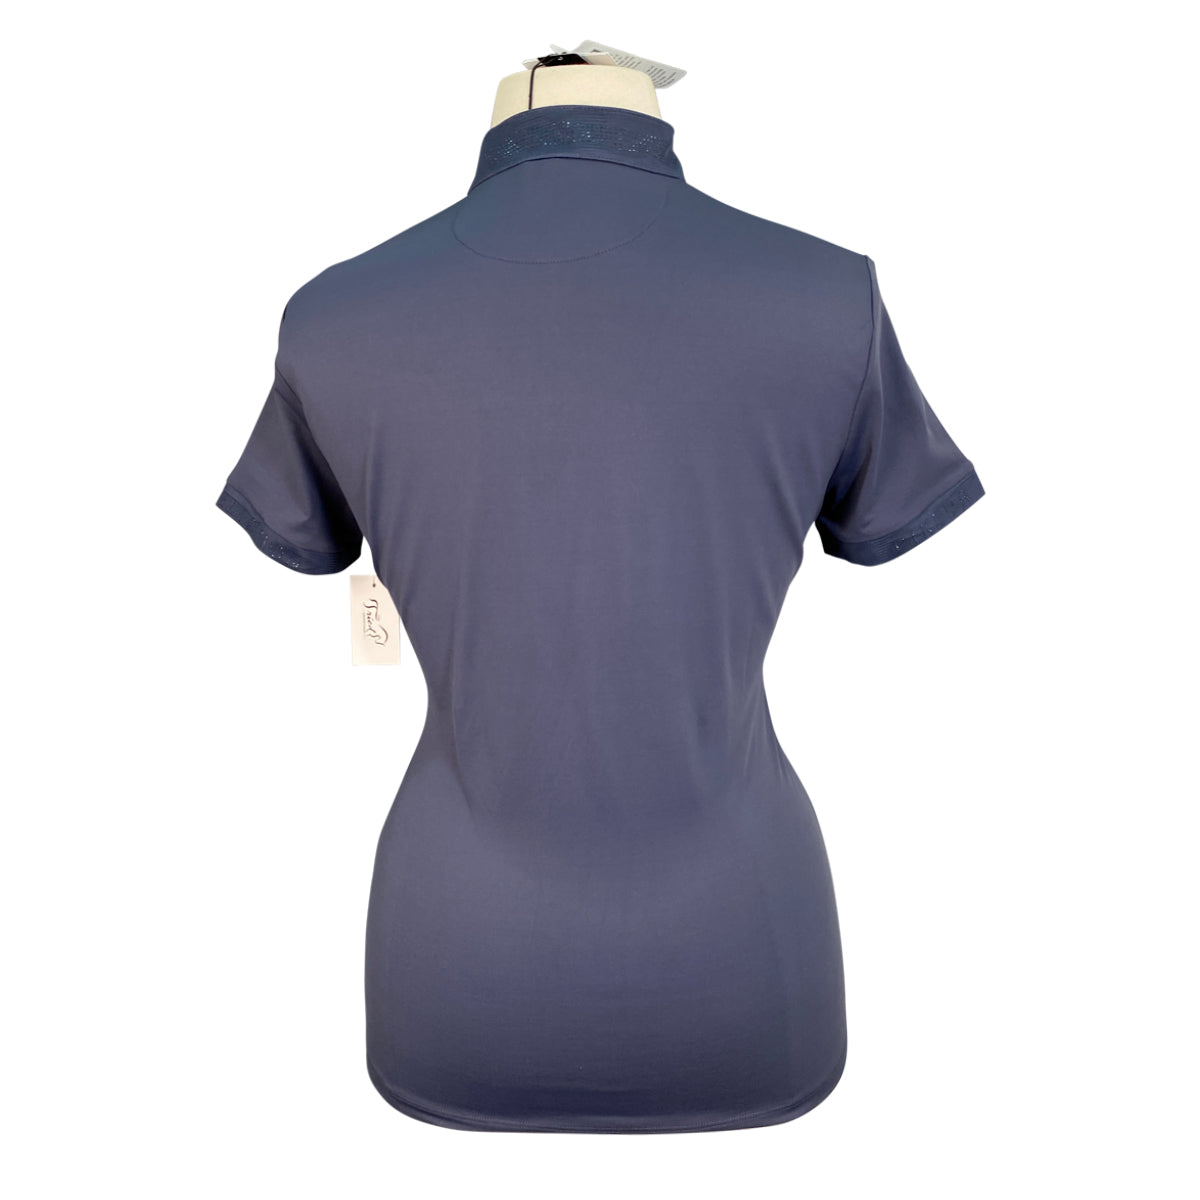 Pikeur 'Pernille' S/S Zip Shirt in Blueberry